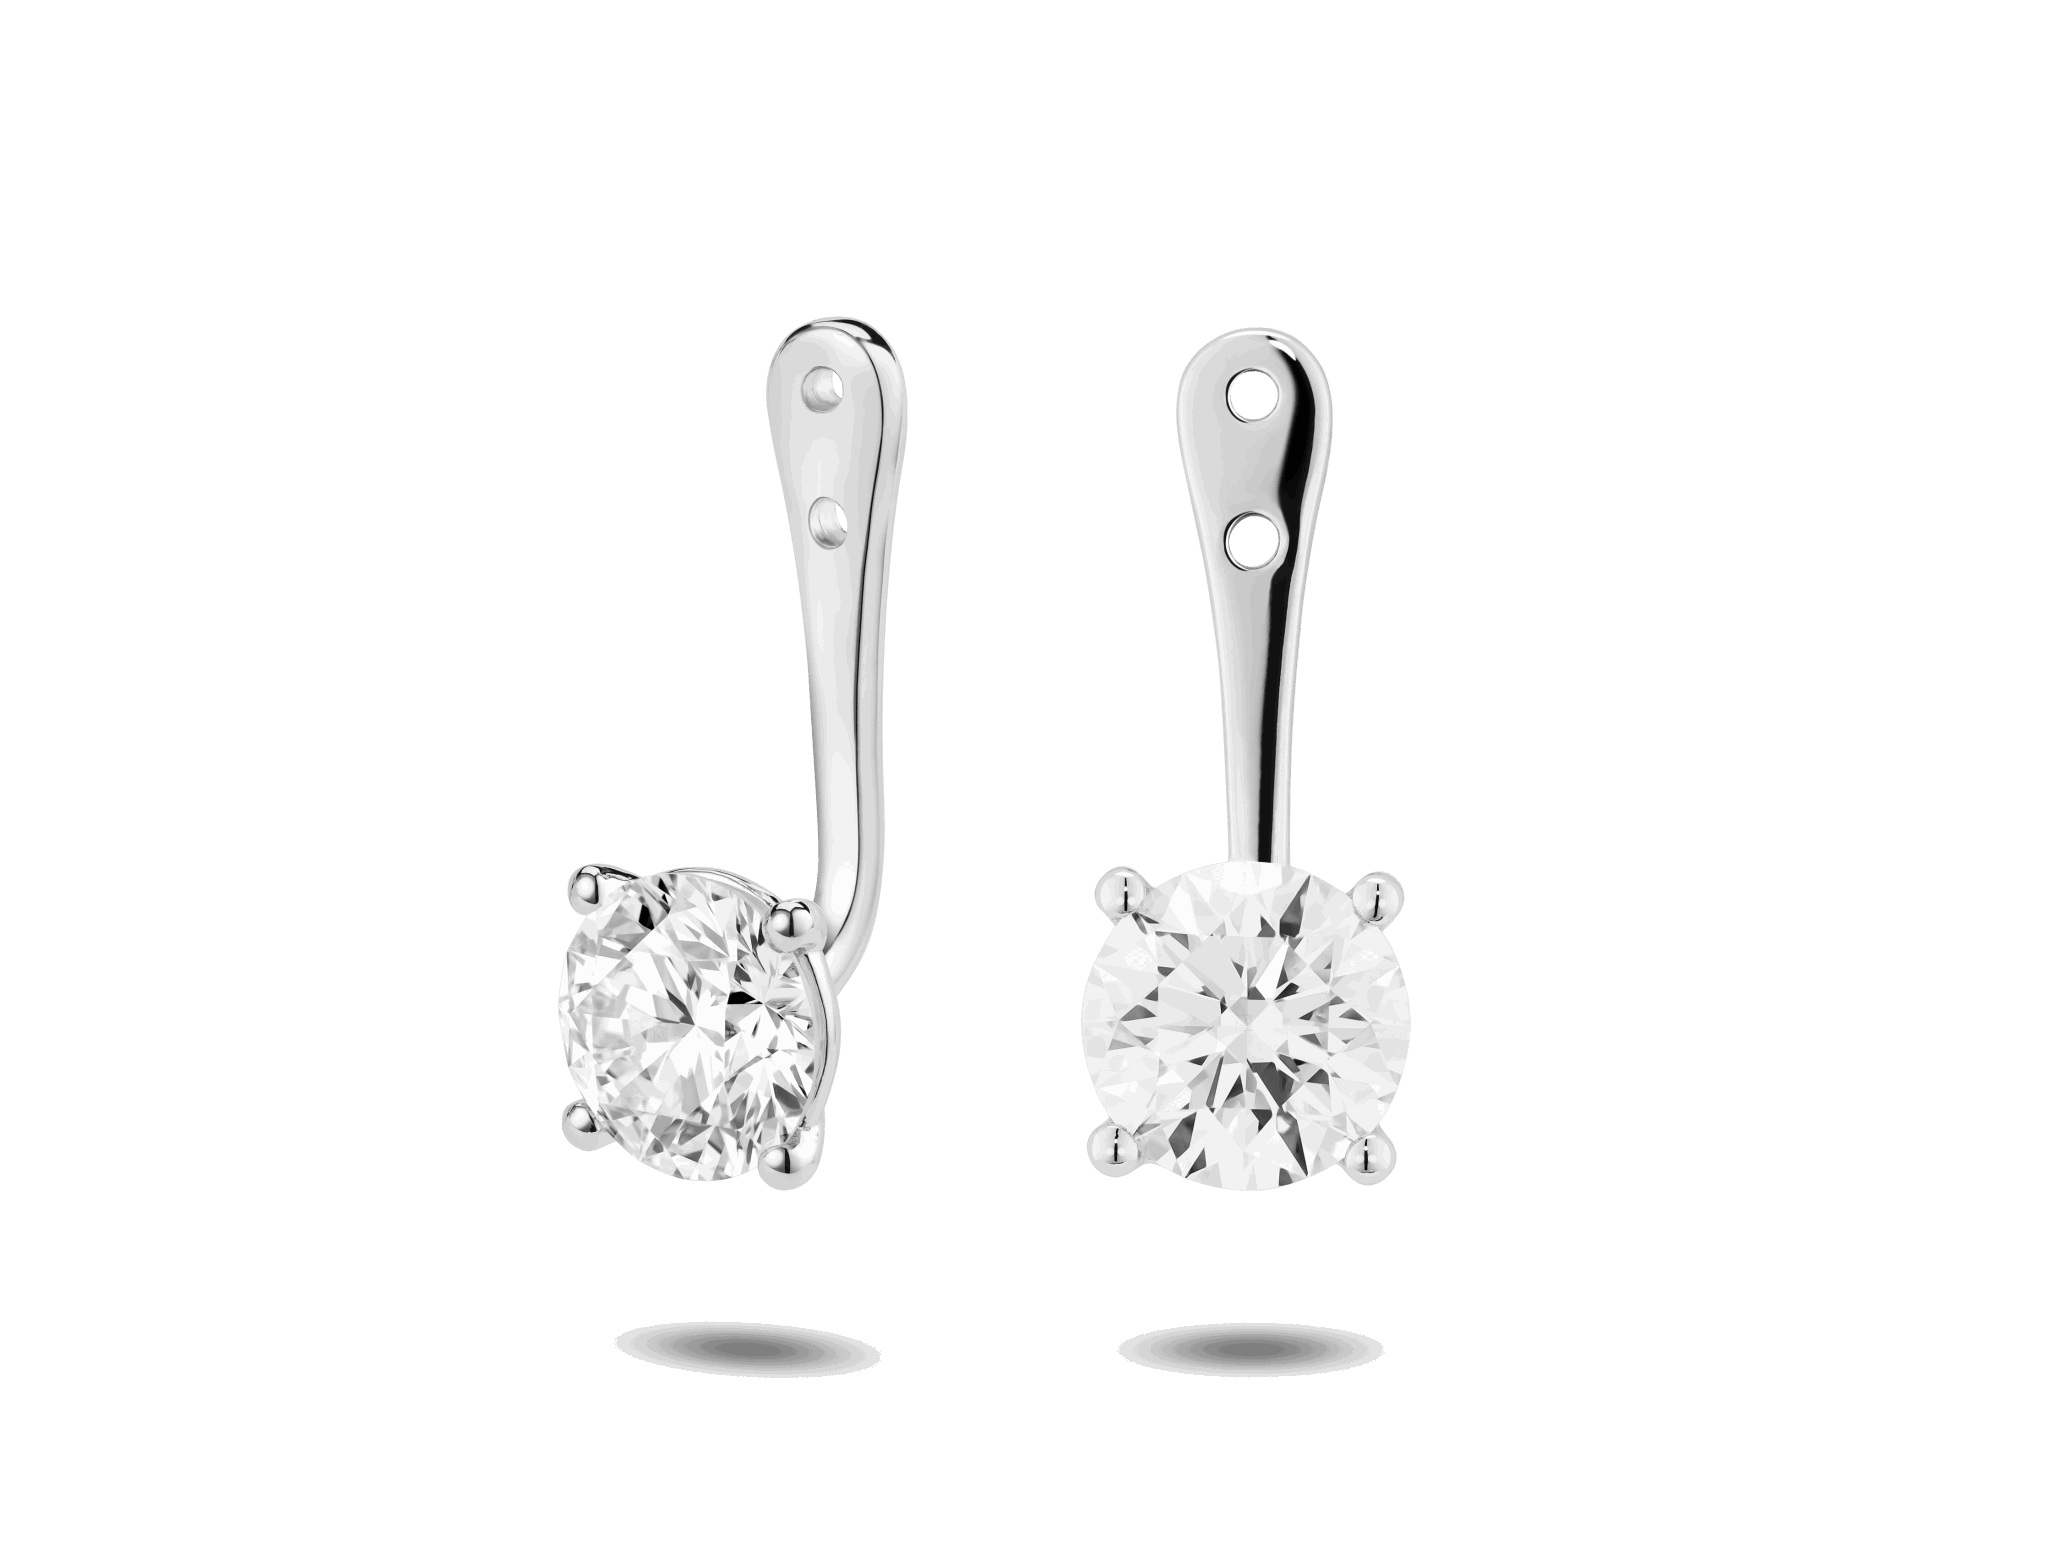 Lab-Grown Diamond 2ct. tw. Round Brilliant Solitaire Ear Jacket Earrings | White - #Lightbox Jewelry#